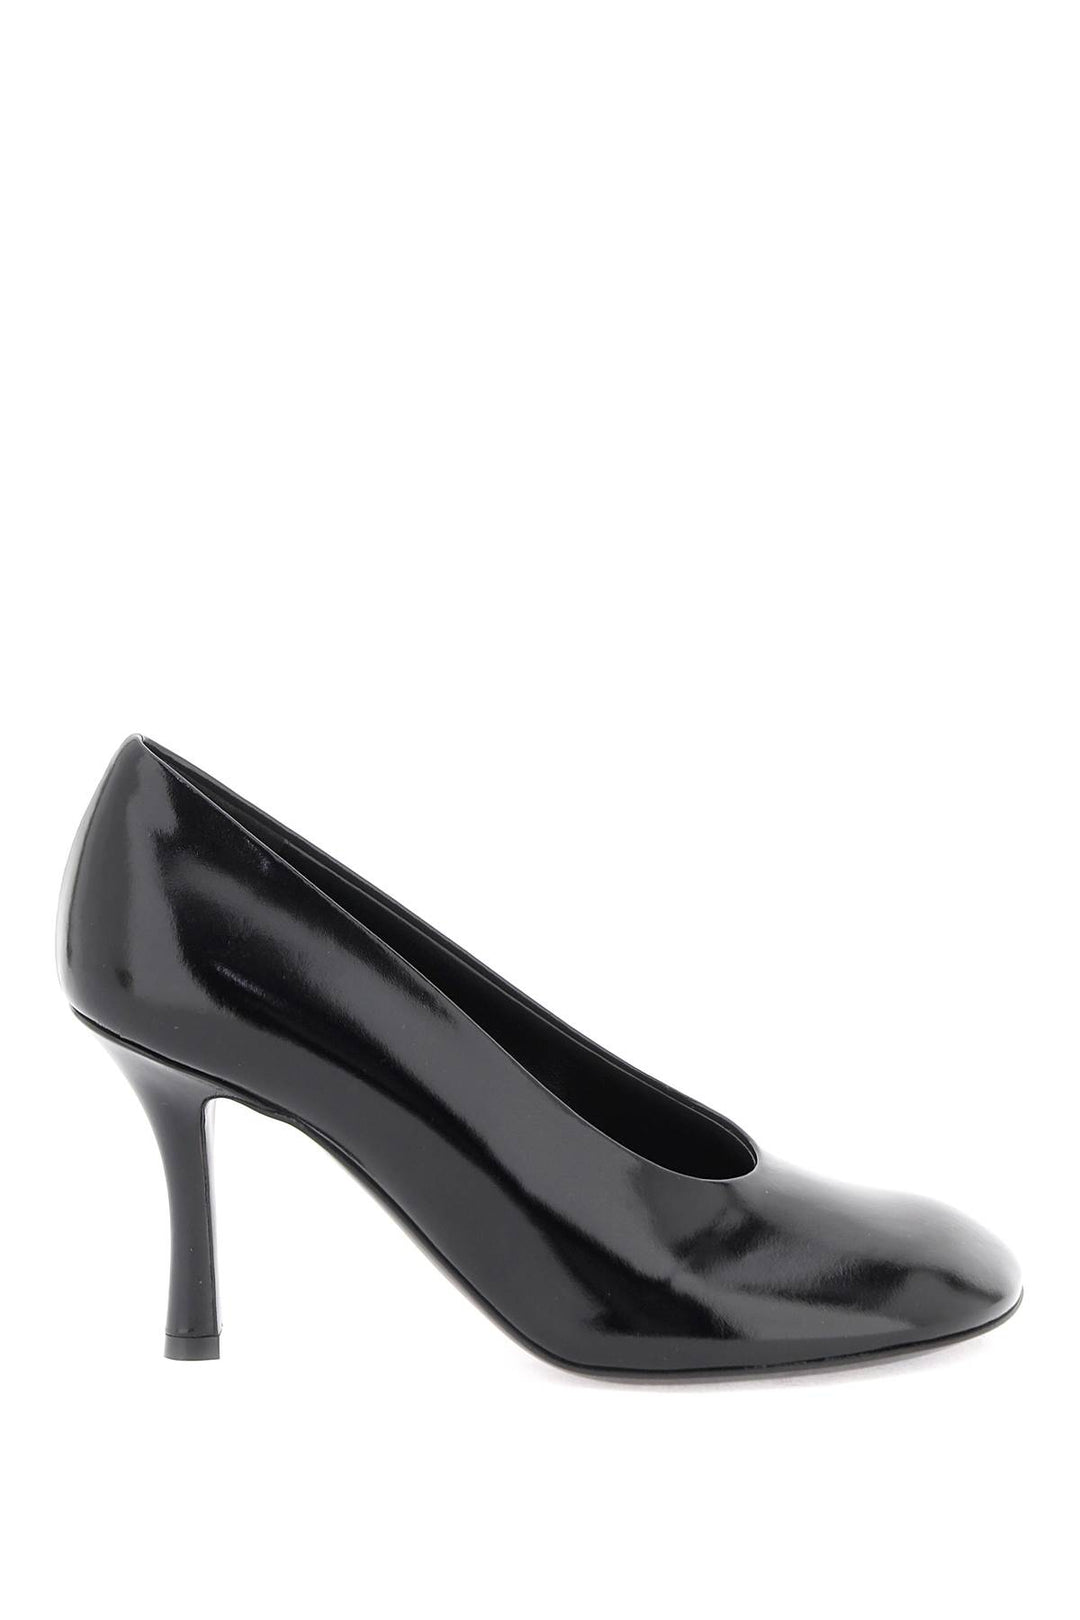 Burberry Glossy Leather Baby Pumps   Nero